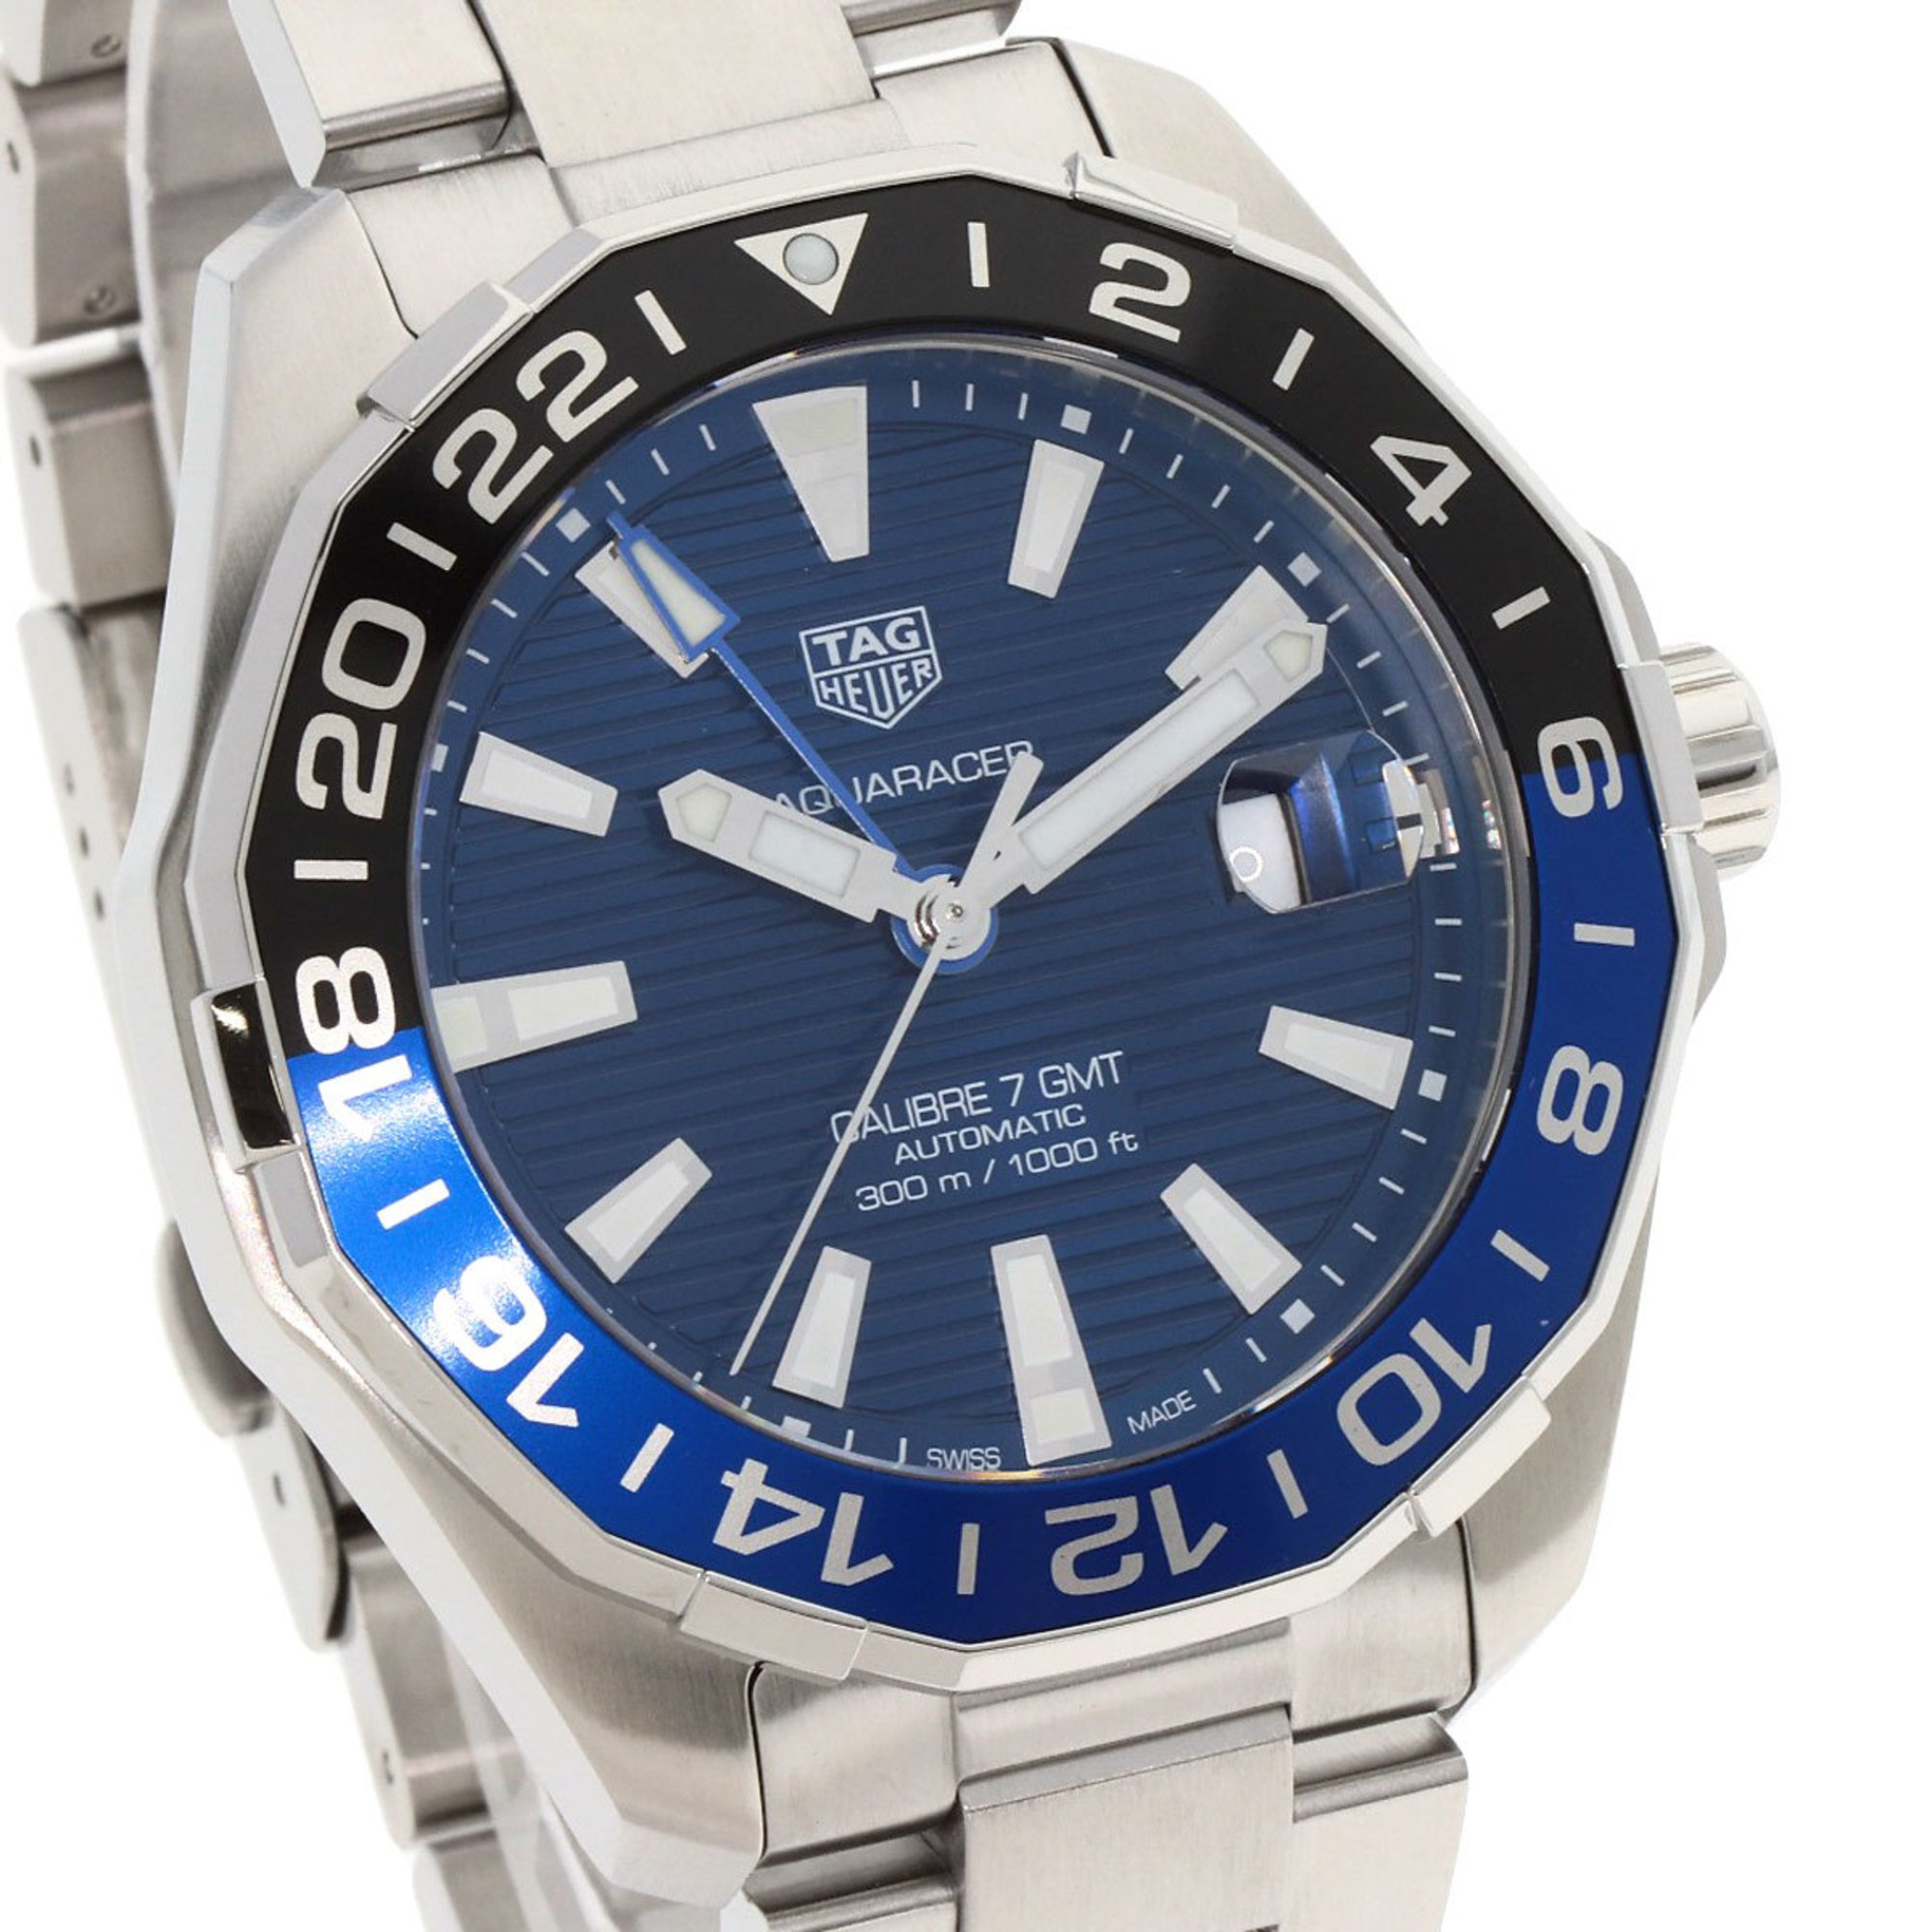 TAG Heuer WAY201T-0 Aquaracer Calibre 7 Watch Stainless Steel SS Men's